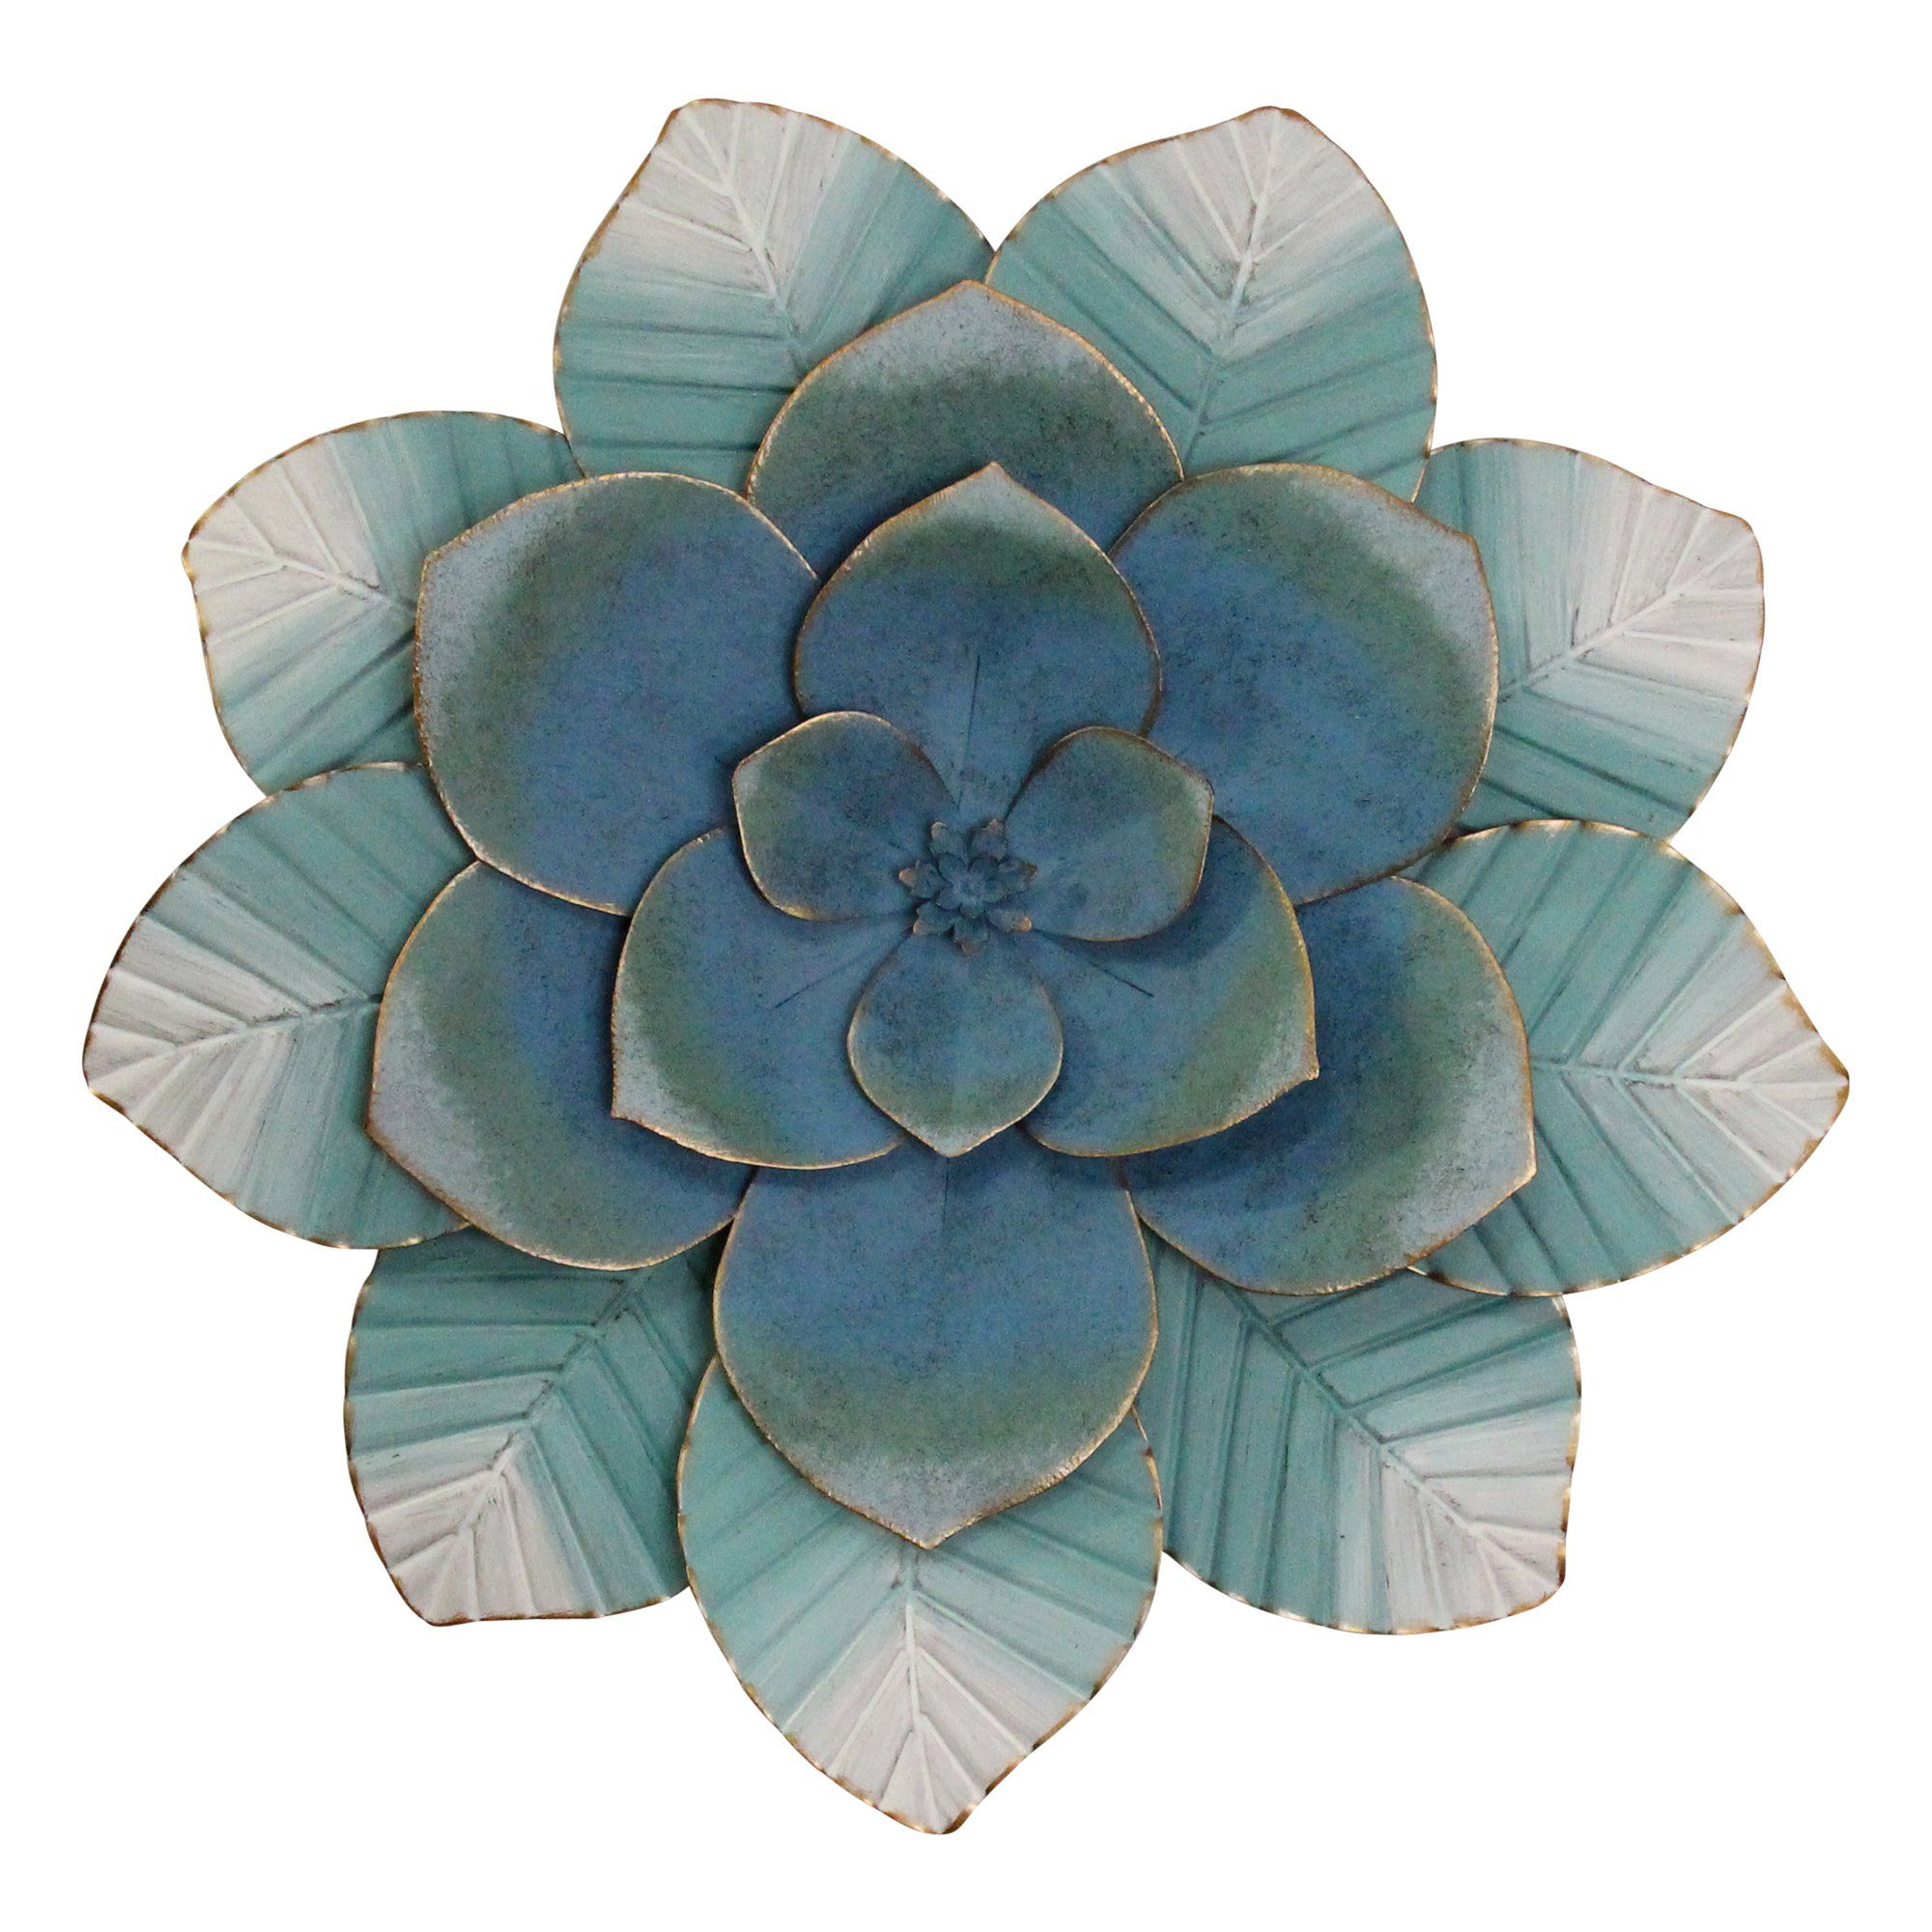 Well Known Stratton Home Decor Blue Ombre Metal Flower Wall Decor Inside Flowers Wall Art (View 2 of 20)